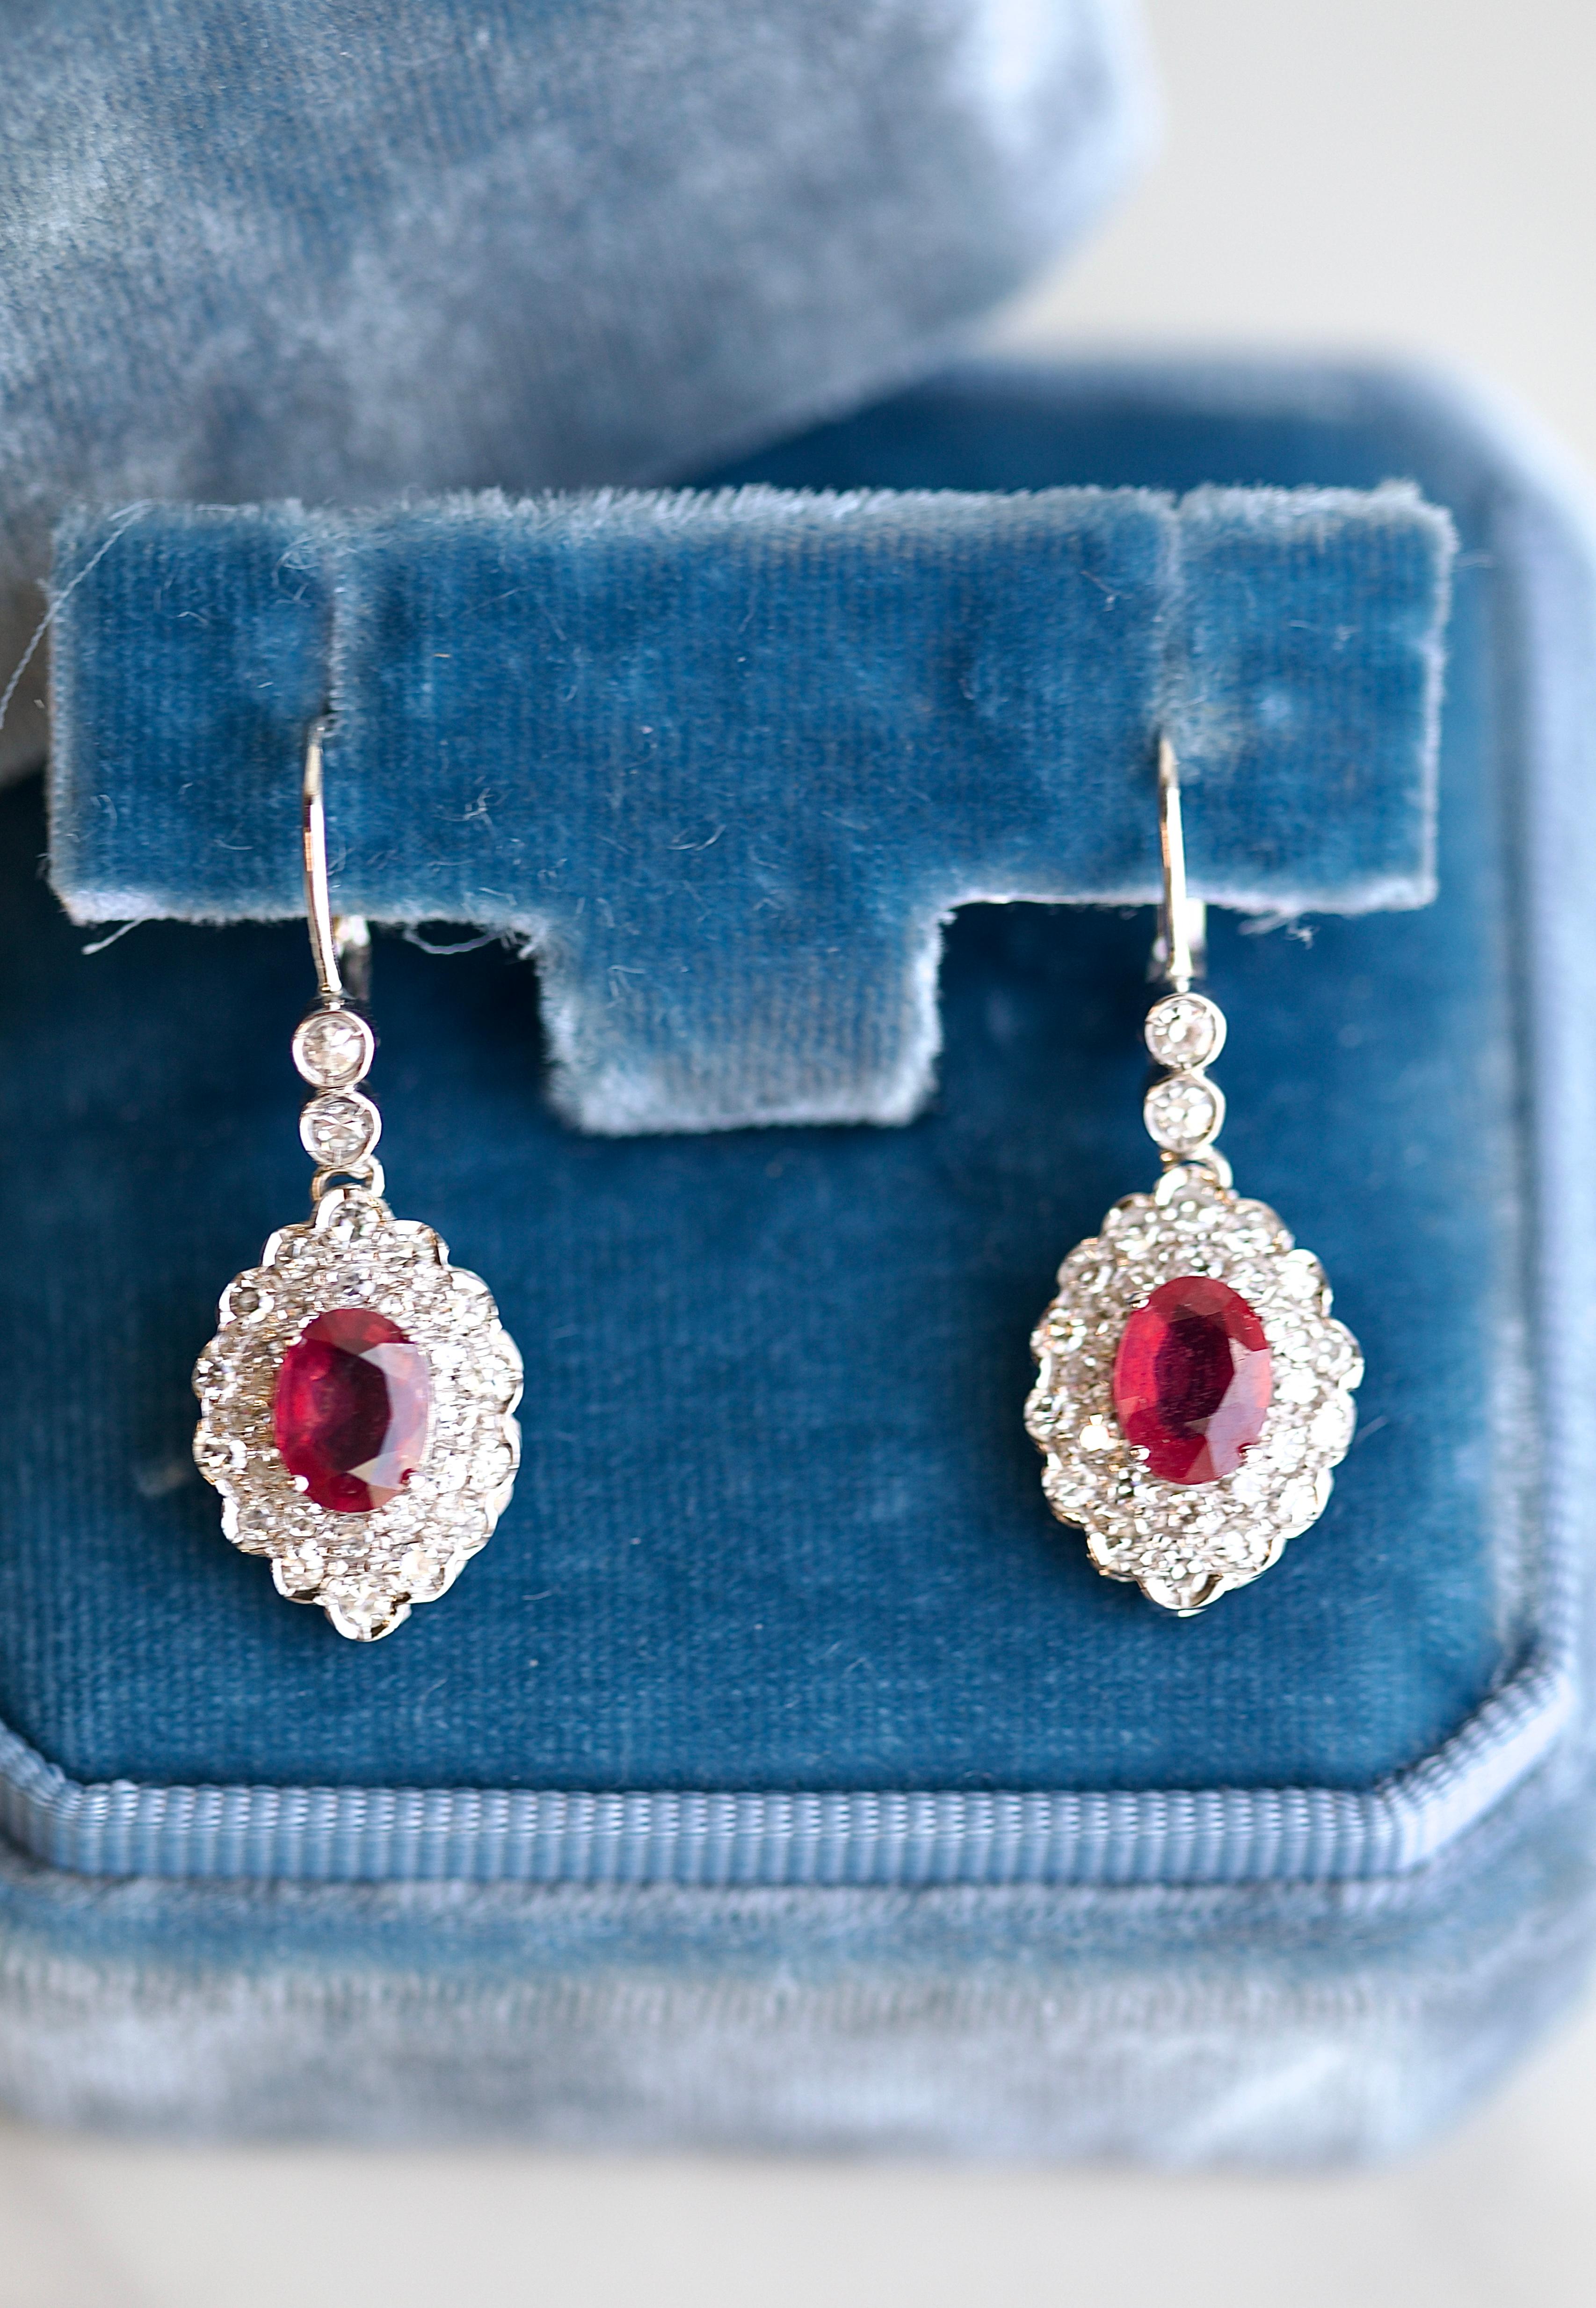 Pair of Art Deco Revival Ruby Diamond 18k White Gold Drop Earrings In Excellent Condition For Sale In Beverly Hills, CA